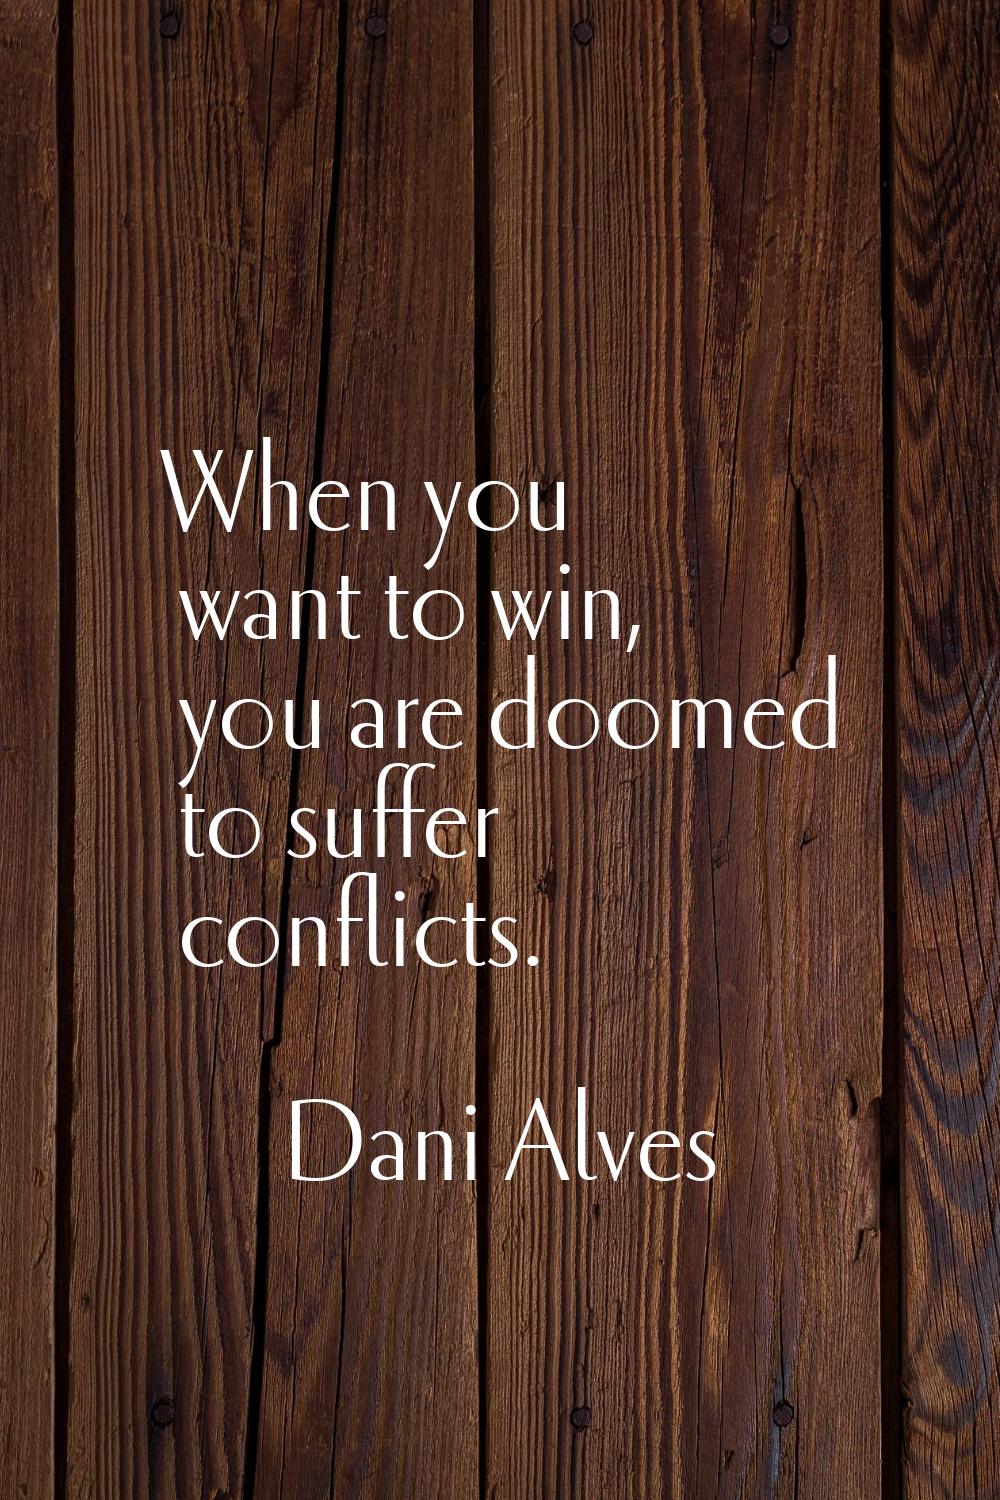 When you want to win, you are doomed to suffer conflicts.